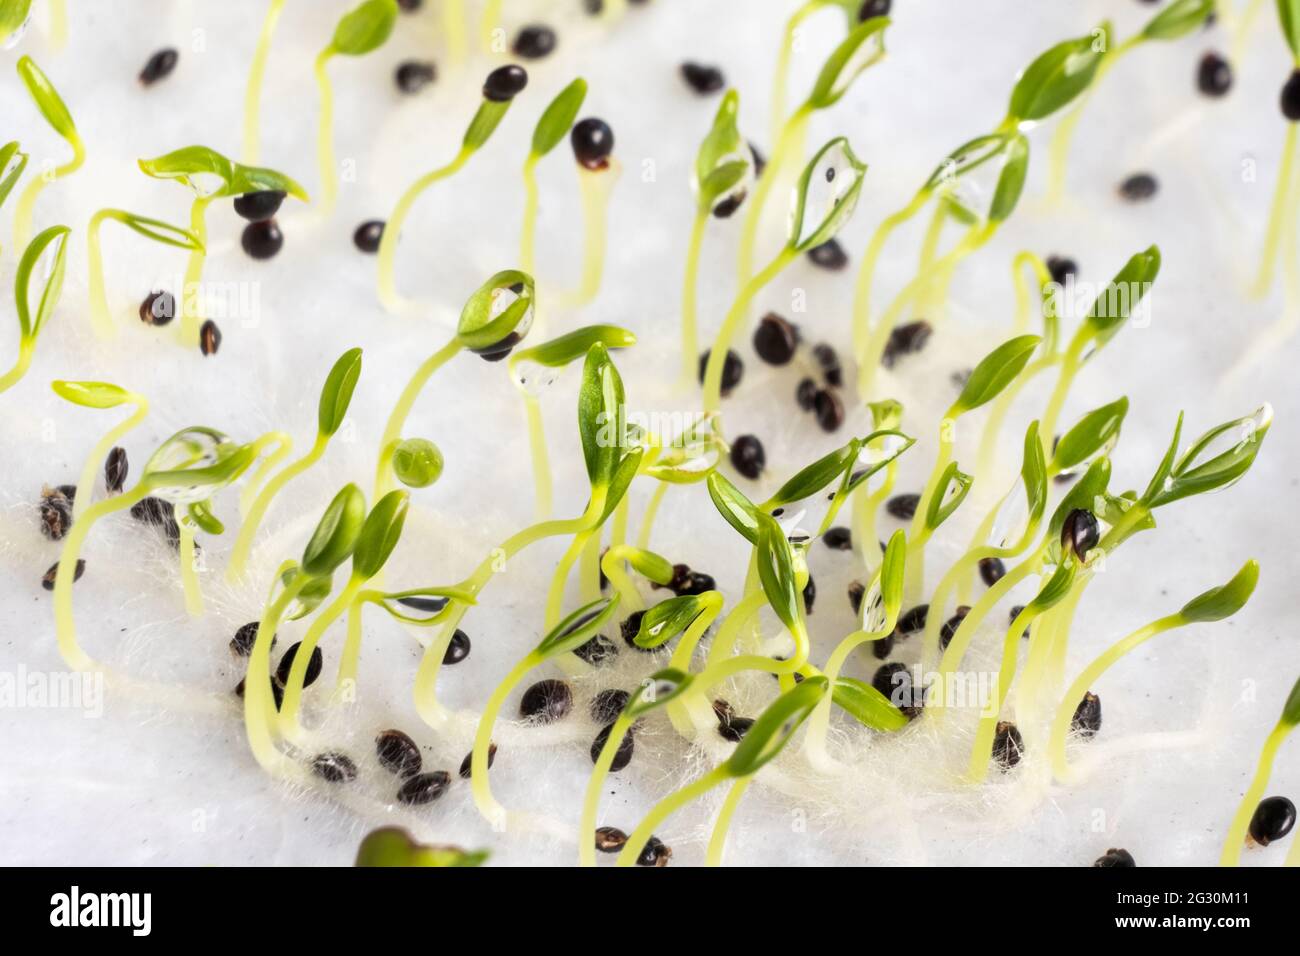 Close-up of Chinese spinach vegetable seeds that have germinated on moist water soaked kitchen towel Stock Photo